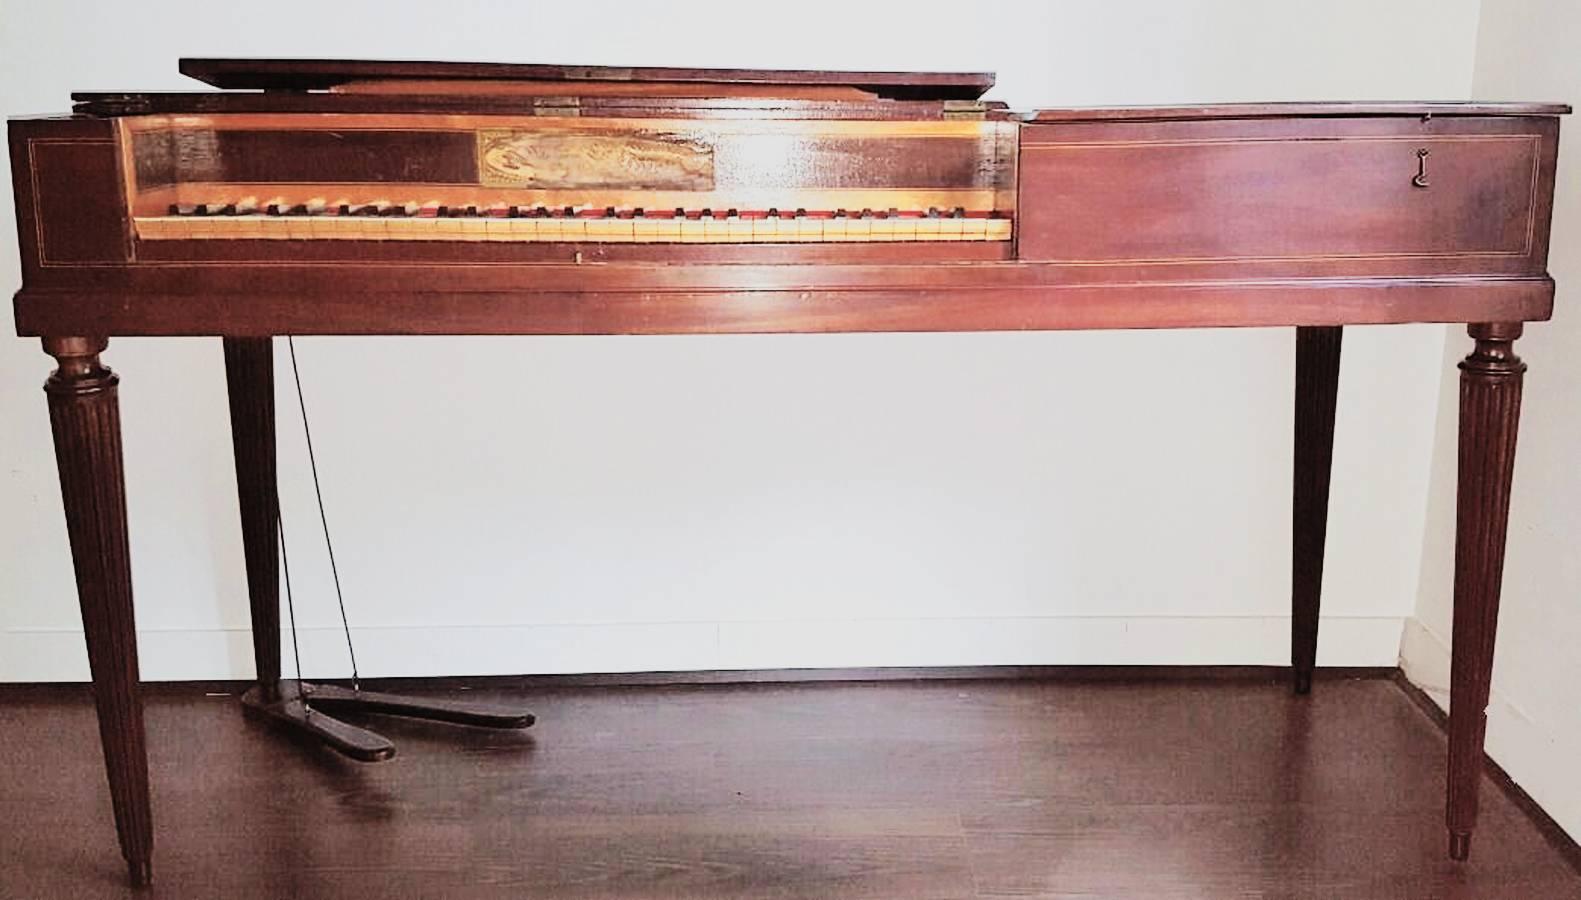 Rare 18th century Forte Piano by Sebastien Erard. Signed and numbered.
Famous composers as Beethoven or Haydn, the Queen Marie Antoinette and the pianist Franz Lits had the pianos Erard .
In 1787 when this piano was ade, Mozart was alive, and